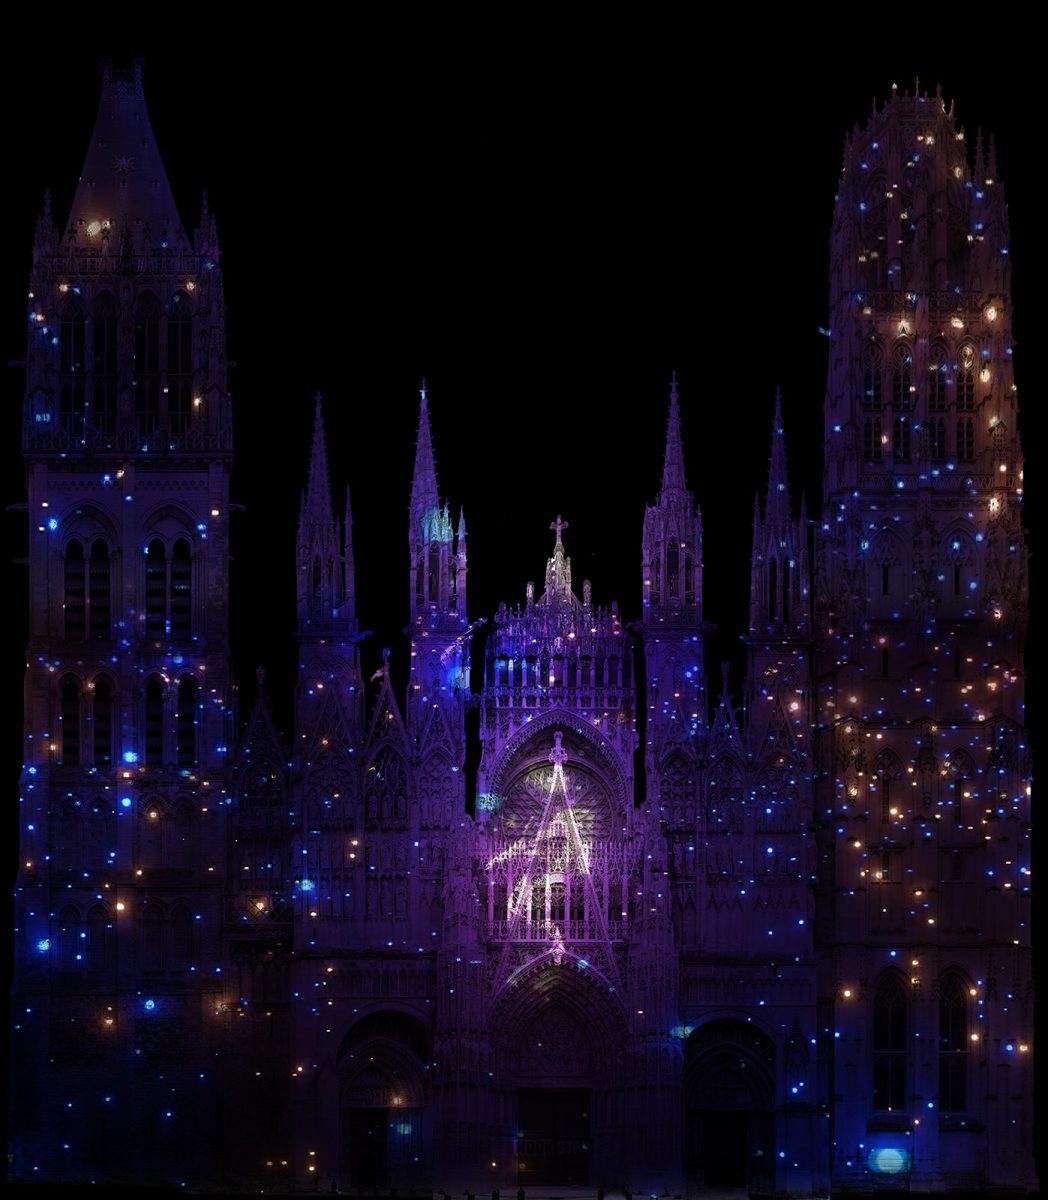 "Star and stone : a kind of love … some say. Cathédrale de Lumière" © Robert Wilson